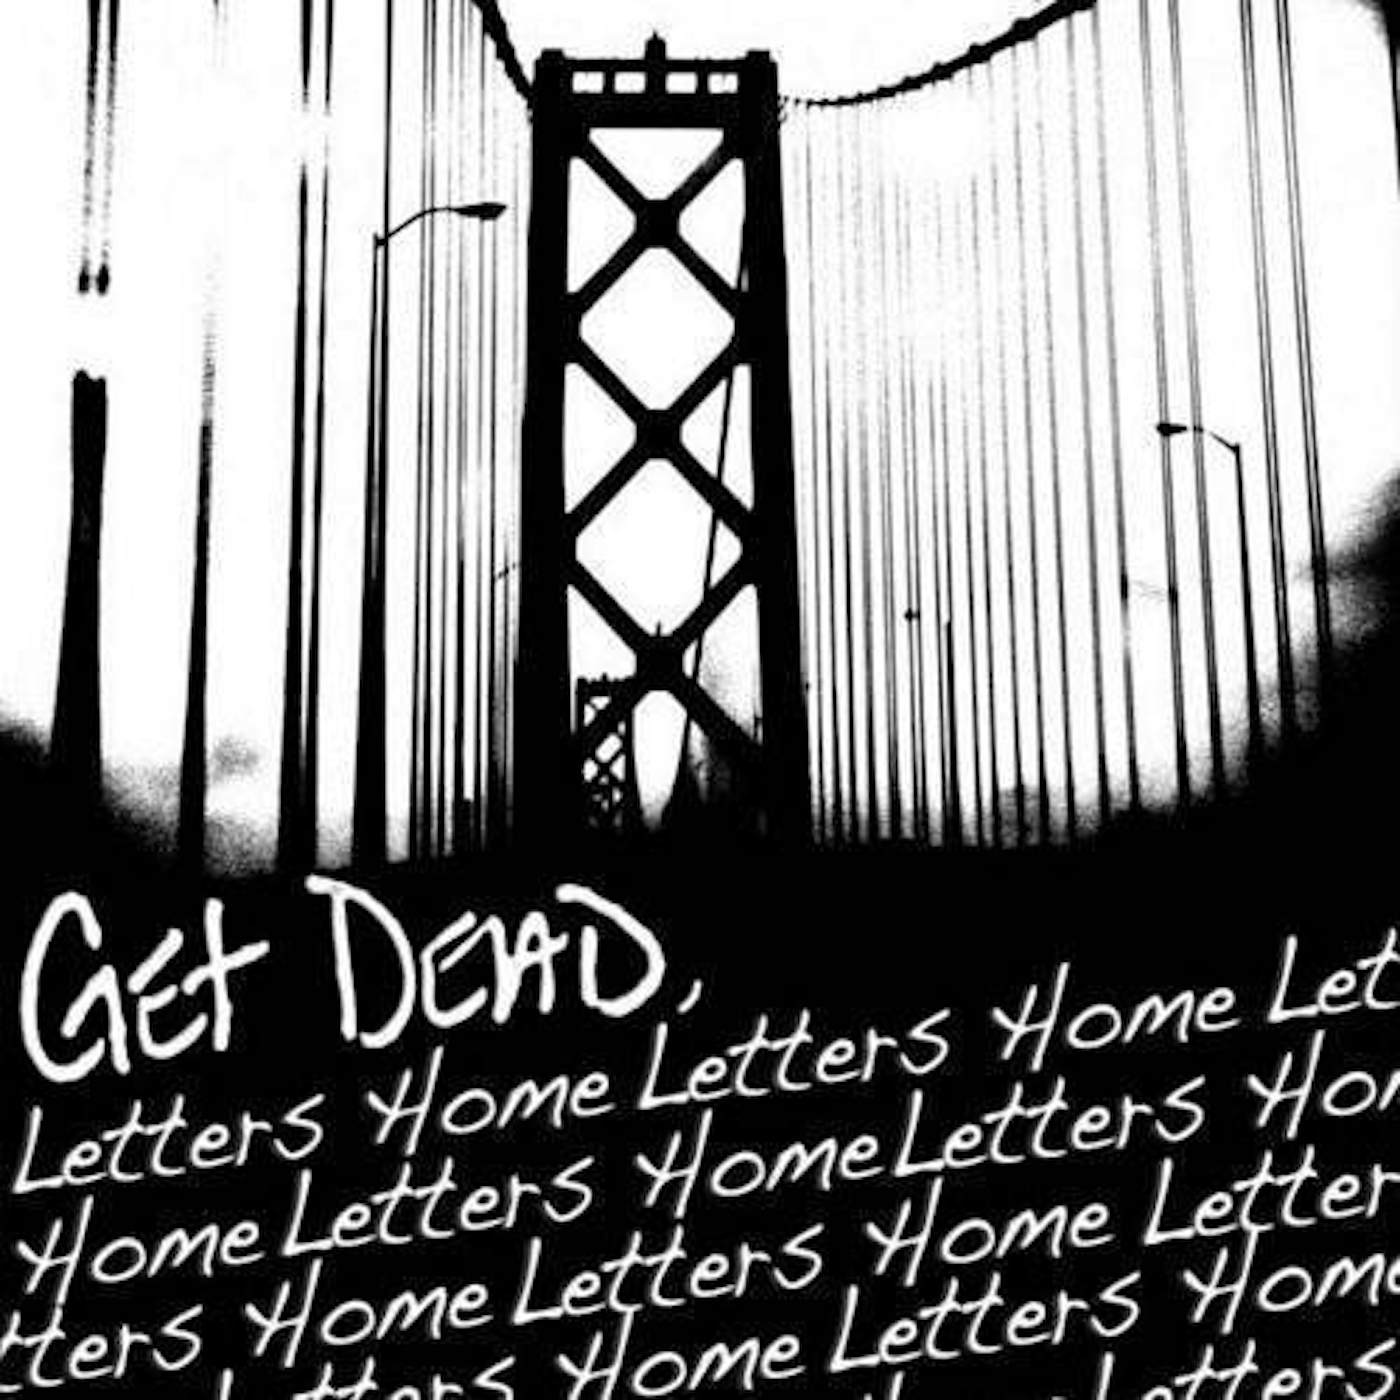 Get Dead Letters Home Vinyl Record